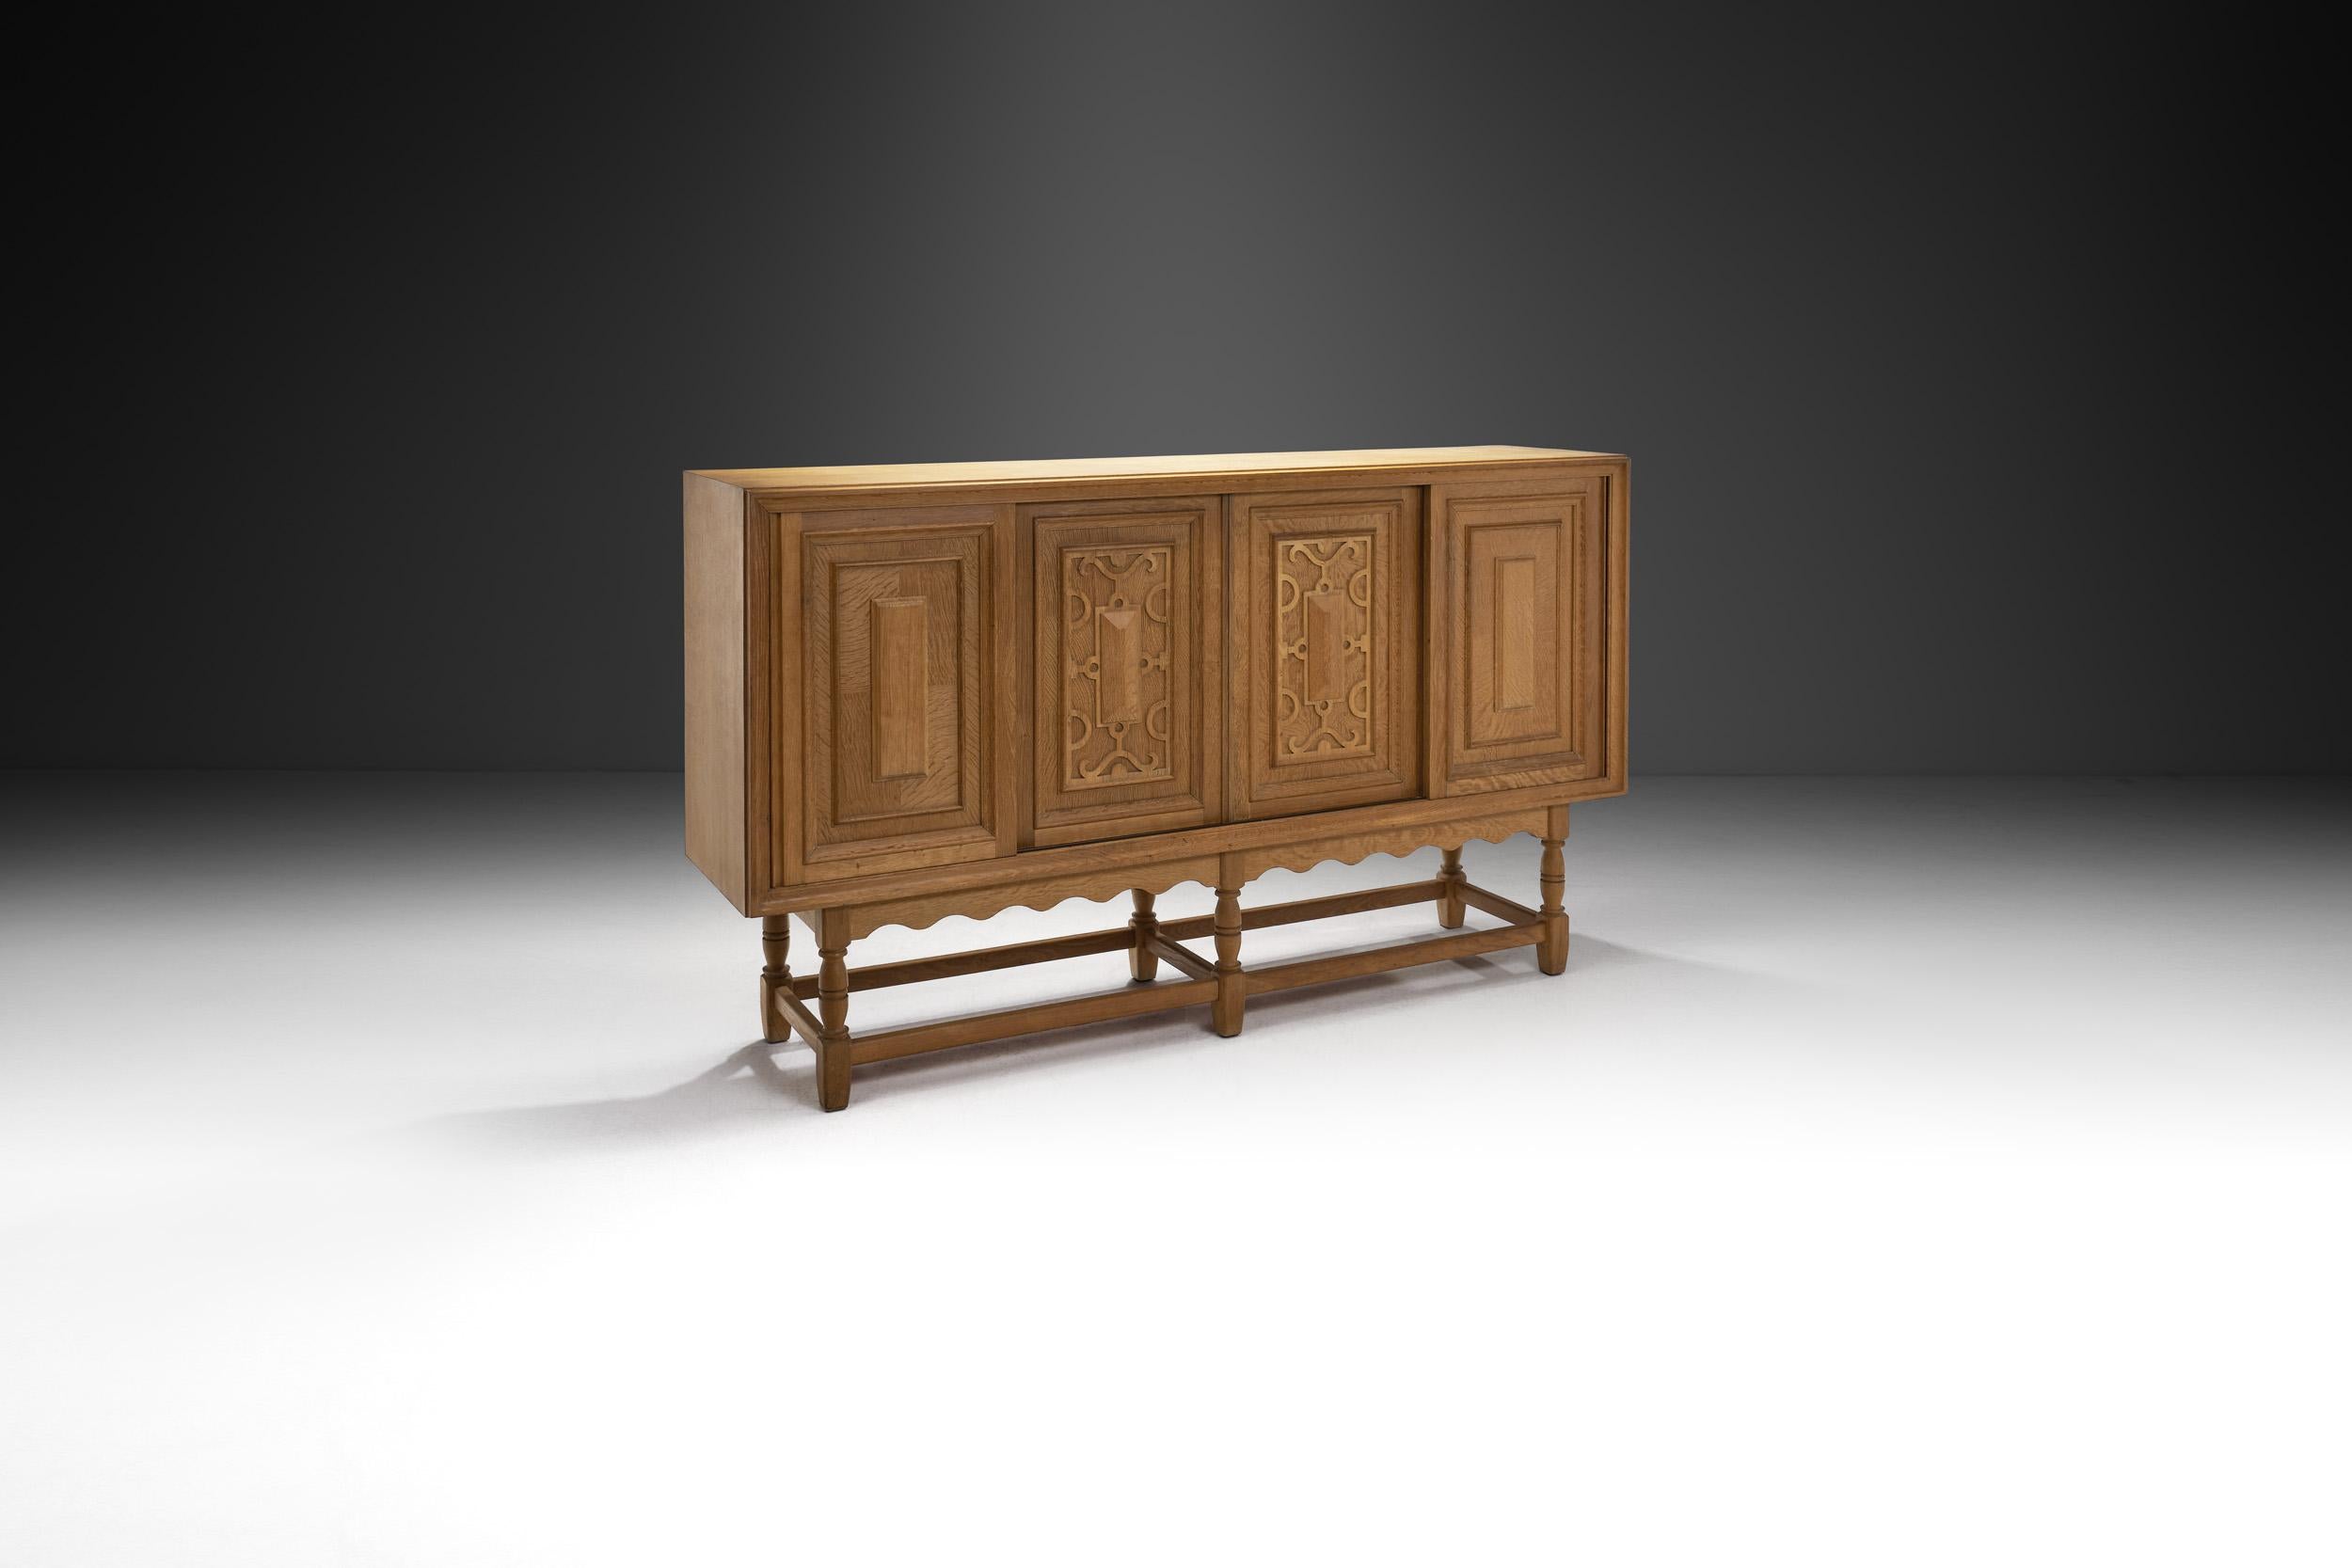 This stunning oak sideboard by Danish designer, Axel O. Röck is enriched with carved details and has a grandiose appearance. The design contains traces of the Baroque style paired with mid-century modern elements.

Axel O. Röck is a lesser known